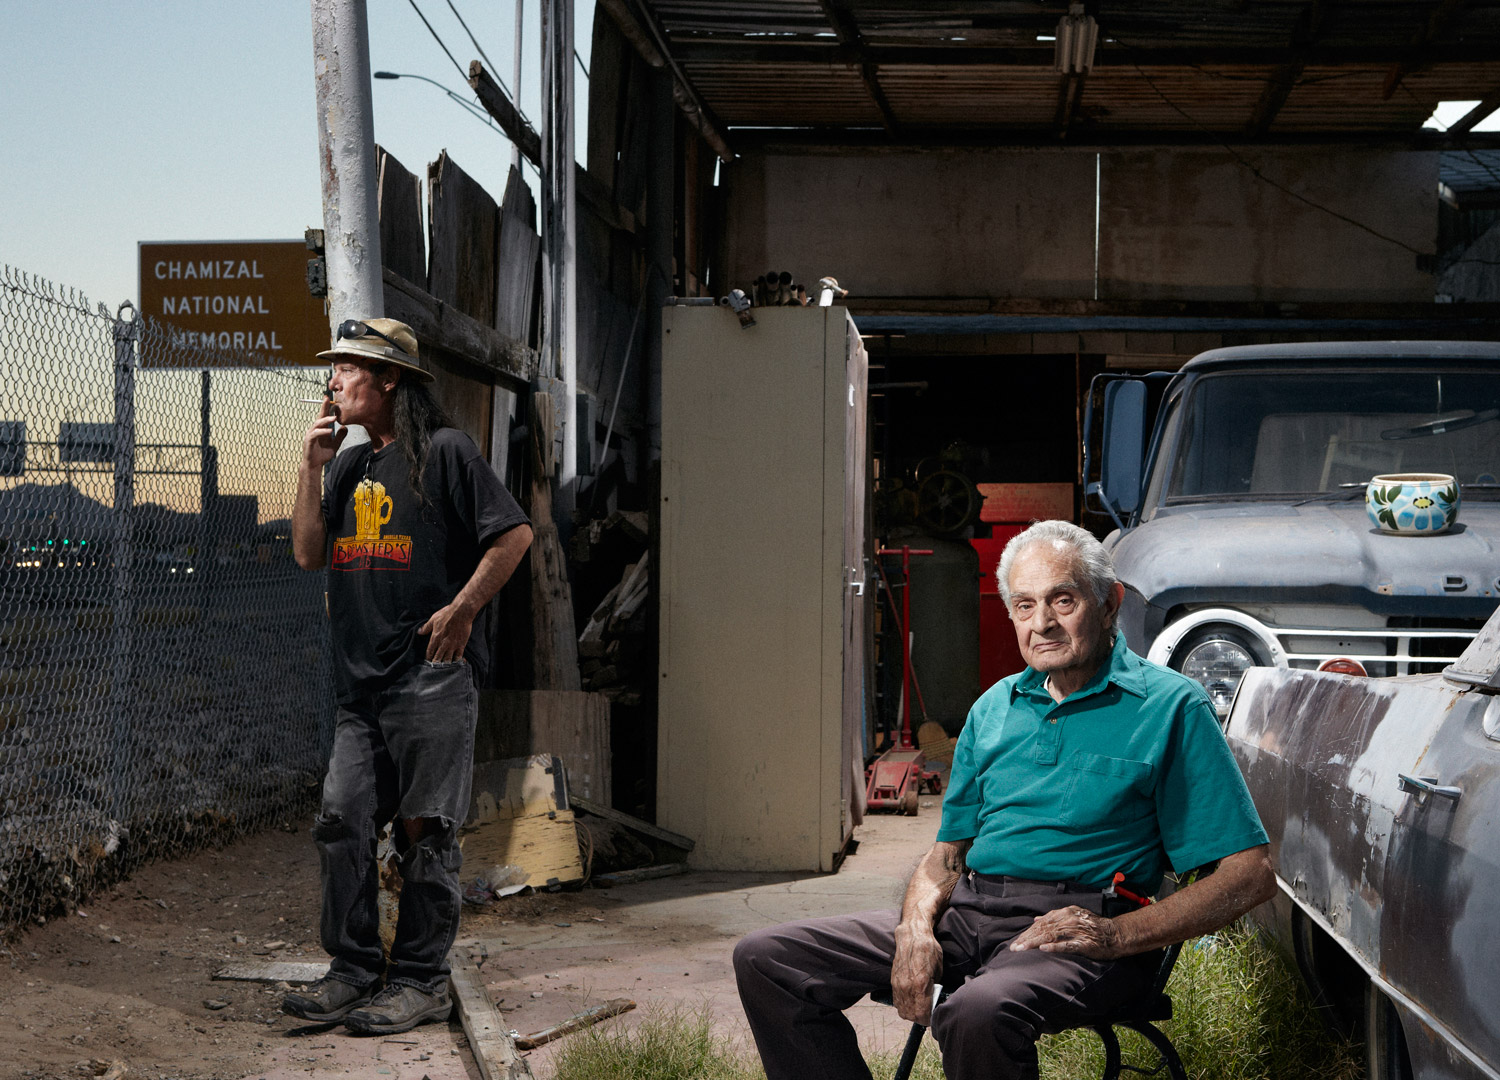 During Prohibition, Victor Delgado used to hear gunfights in what is now the Chamizal National Memorial. Back then it was No Man's Land, a disputed territory between Mexico and the United States where people grazed their goats and ran tequila across the border. Though the national boundaries are now official, Victor still lives in a transitional space: up until the border fence was built, he'd often find people in his yard, hiding from the Border Patrol.